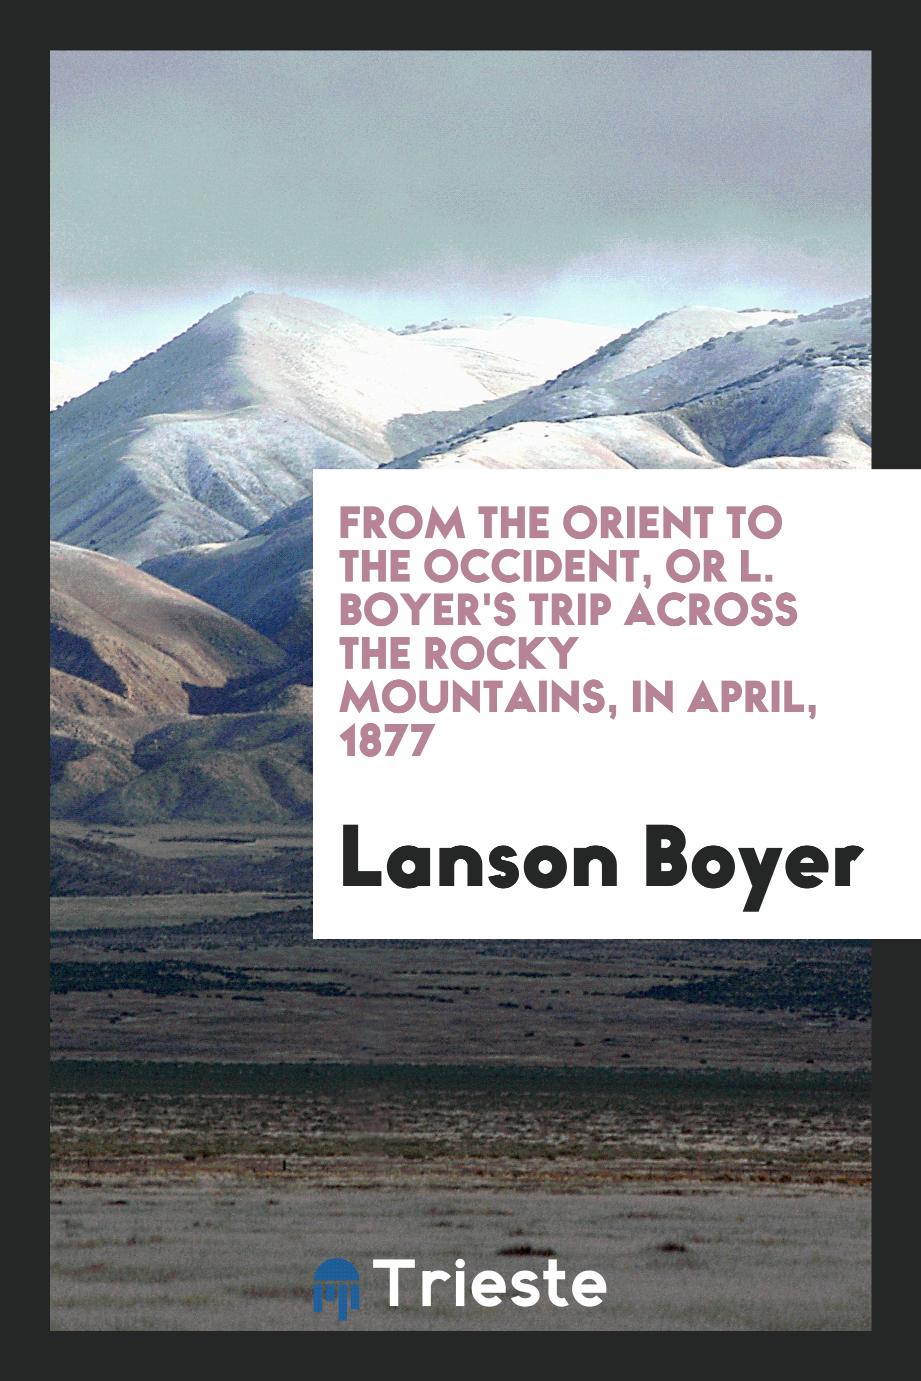 From the Orient to the Occident, or L. Boyer's Trip Across the Rocky Mountains, in April, 1877